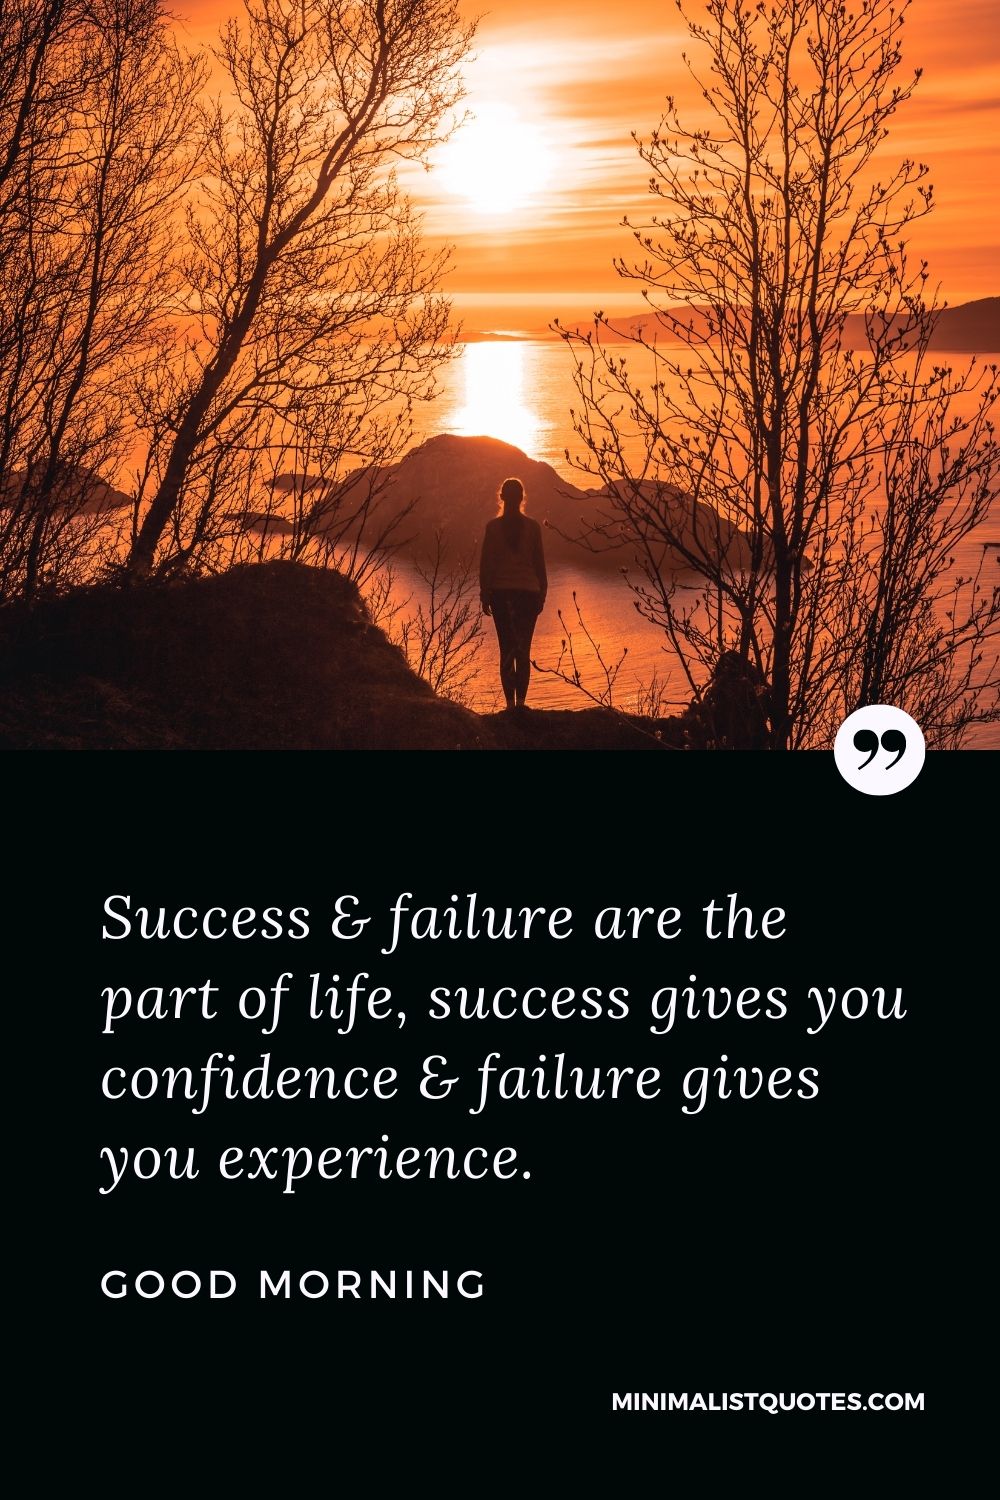 Success & failure are the part of life, success gives you ...